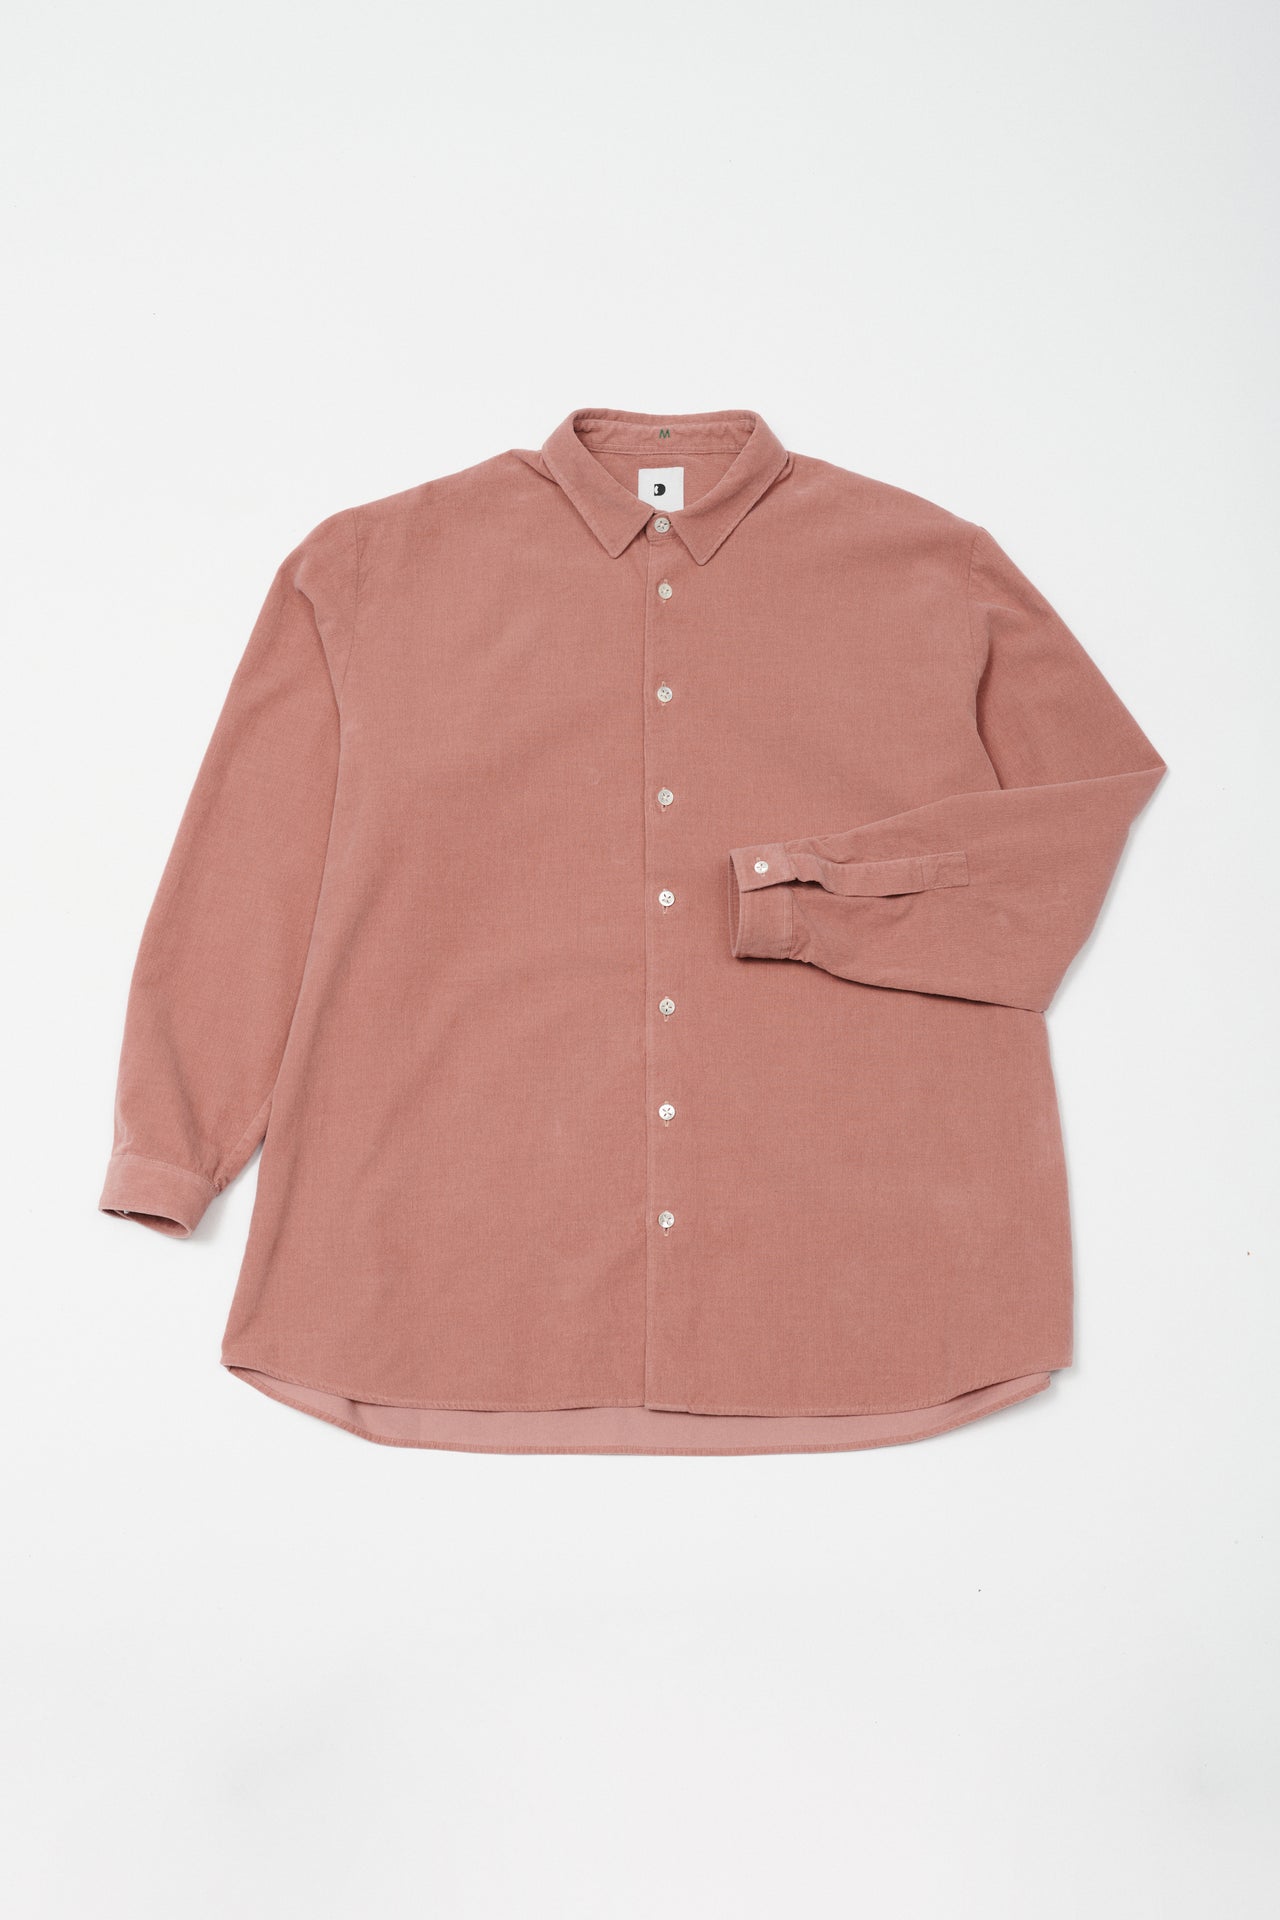 Boxy Unisex Shirt in Dusty Pink in the finest Japanese Baby Corduroy Cotton